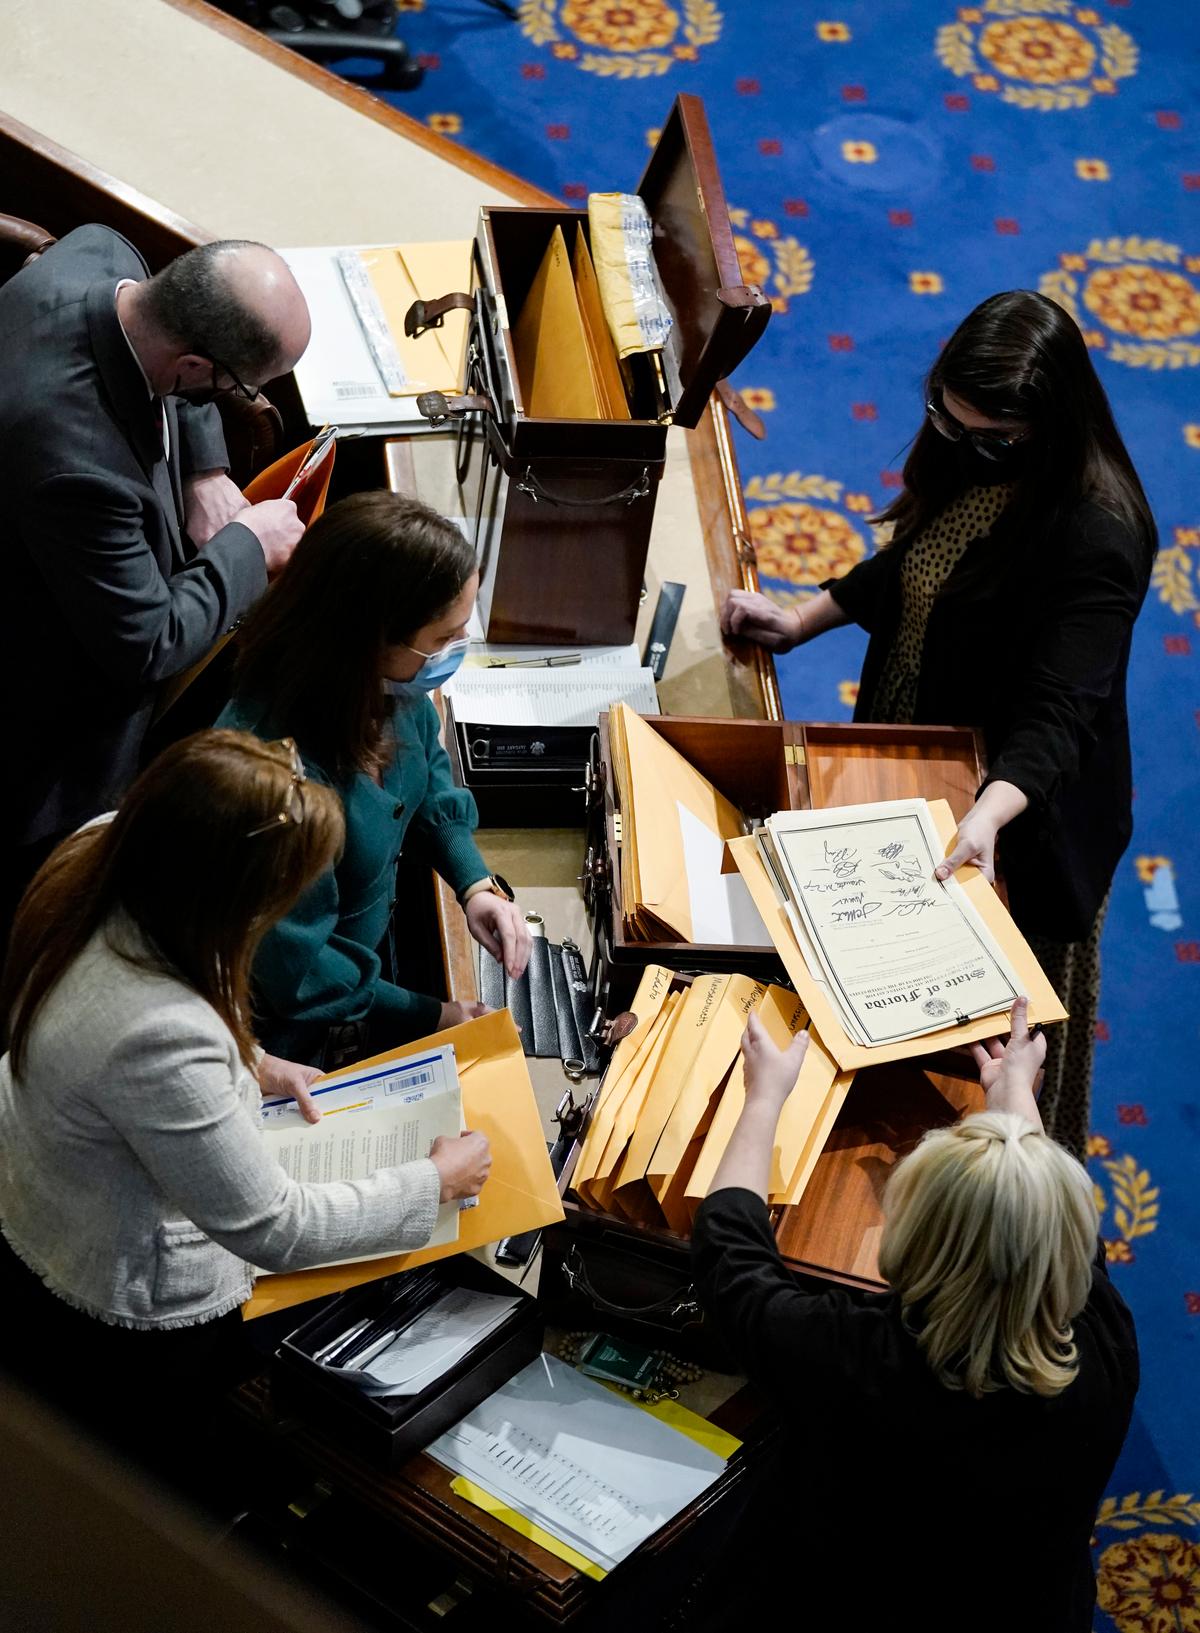  WASHINGTON, DC - JANUARY 06: Congressional aides examine electoral college votes in the House Chamber during a reconvening of a joint session of Congress on January 06, 2021 in Washington, DC. Members of Congress returned to the House Chamber after being evacuated when protesters stormed the Capitol and disrupted a joint session to ratify President-elect Joe Biden's 306-232 Electoral College win over President Donald Trump. (Photo by Drew Angerer/Getty Images)